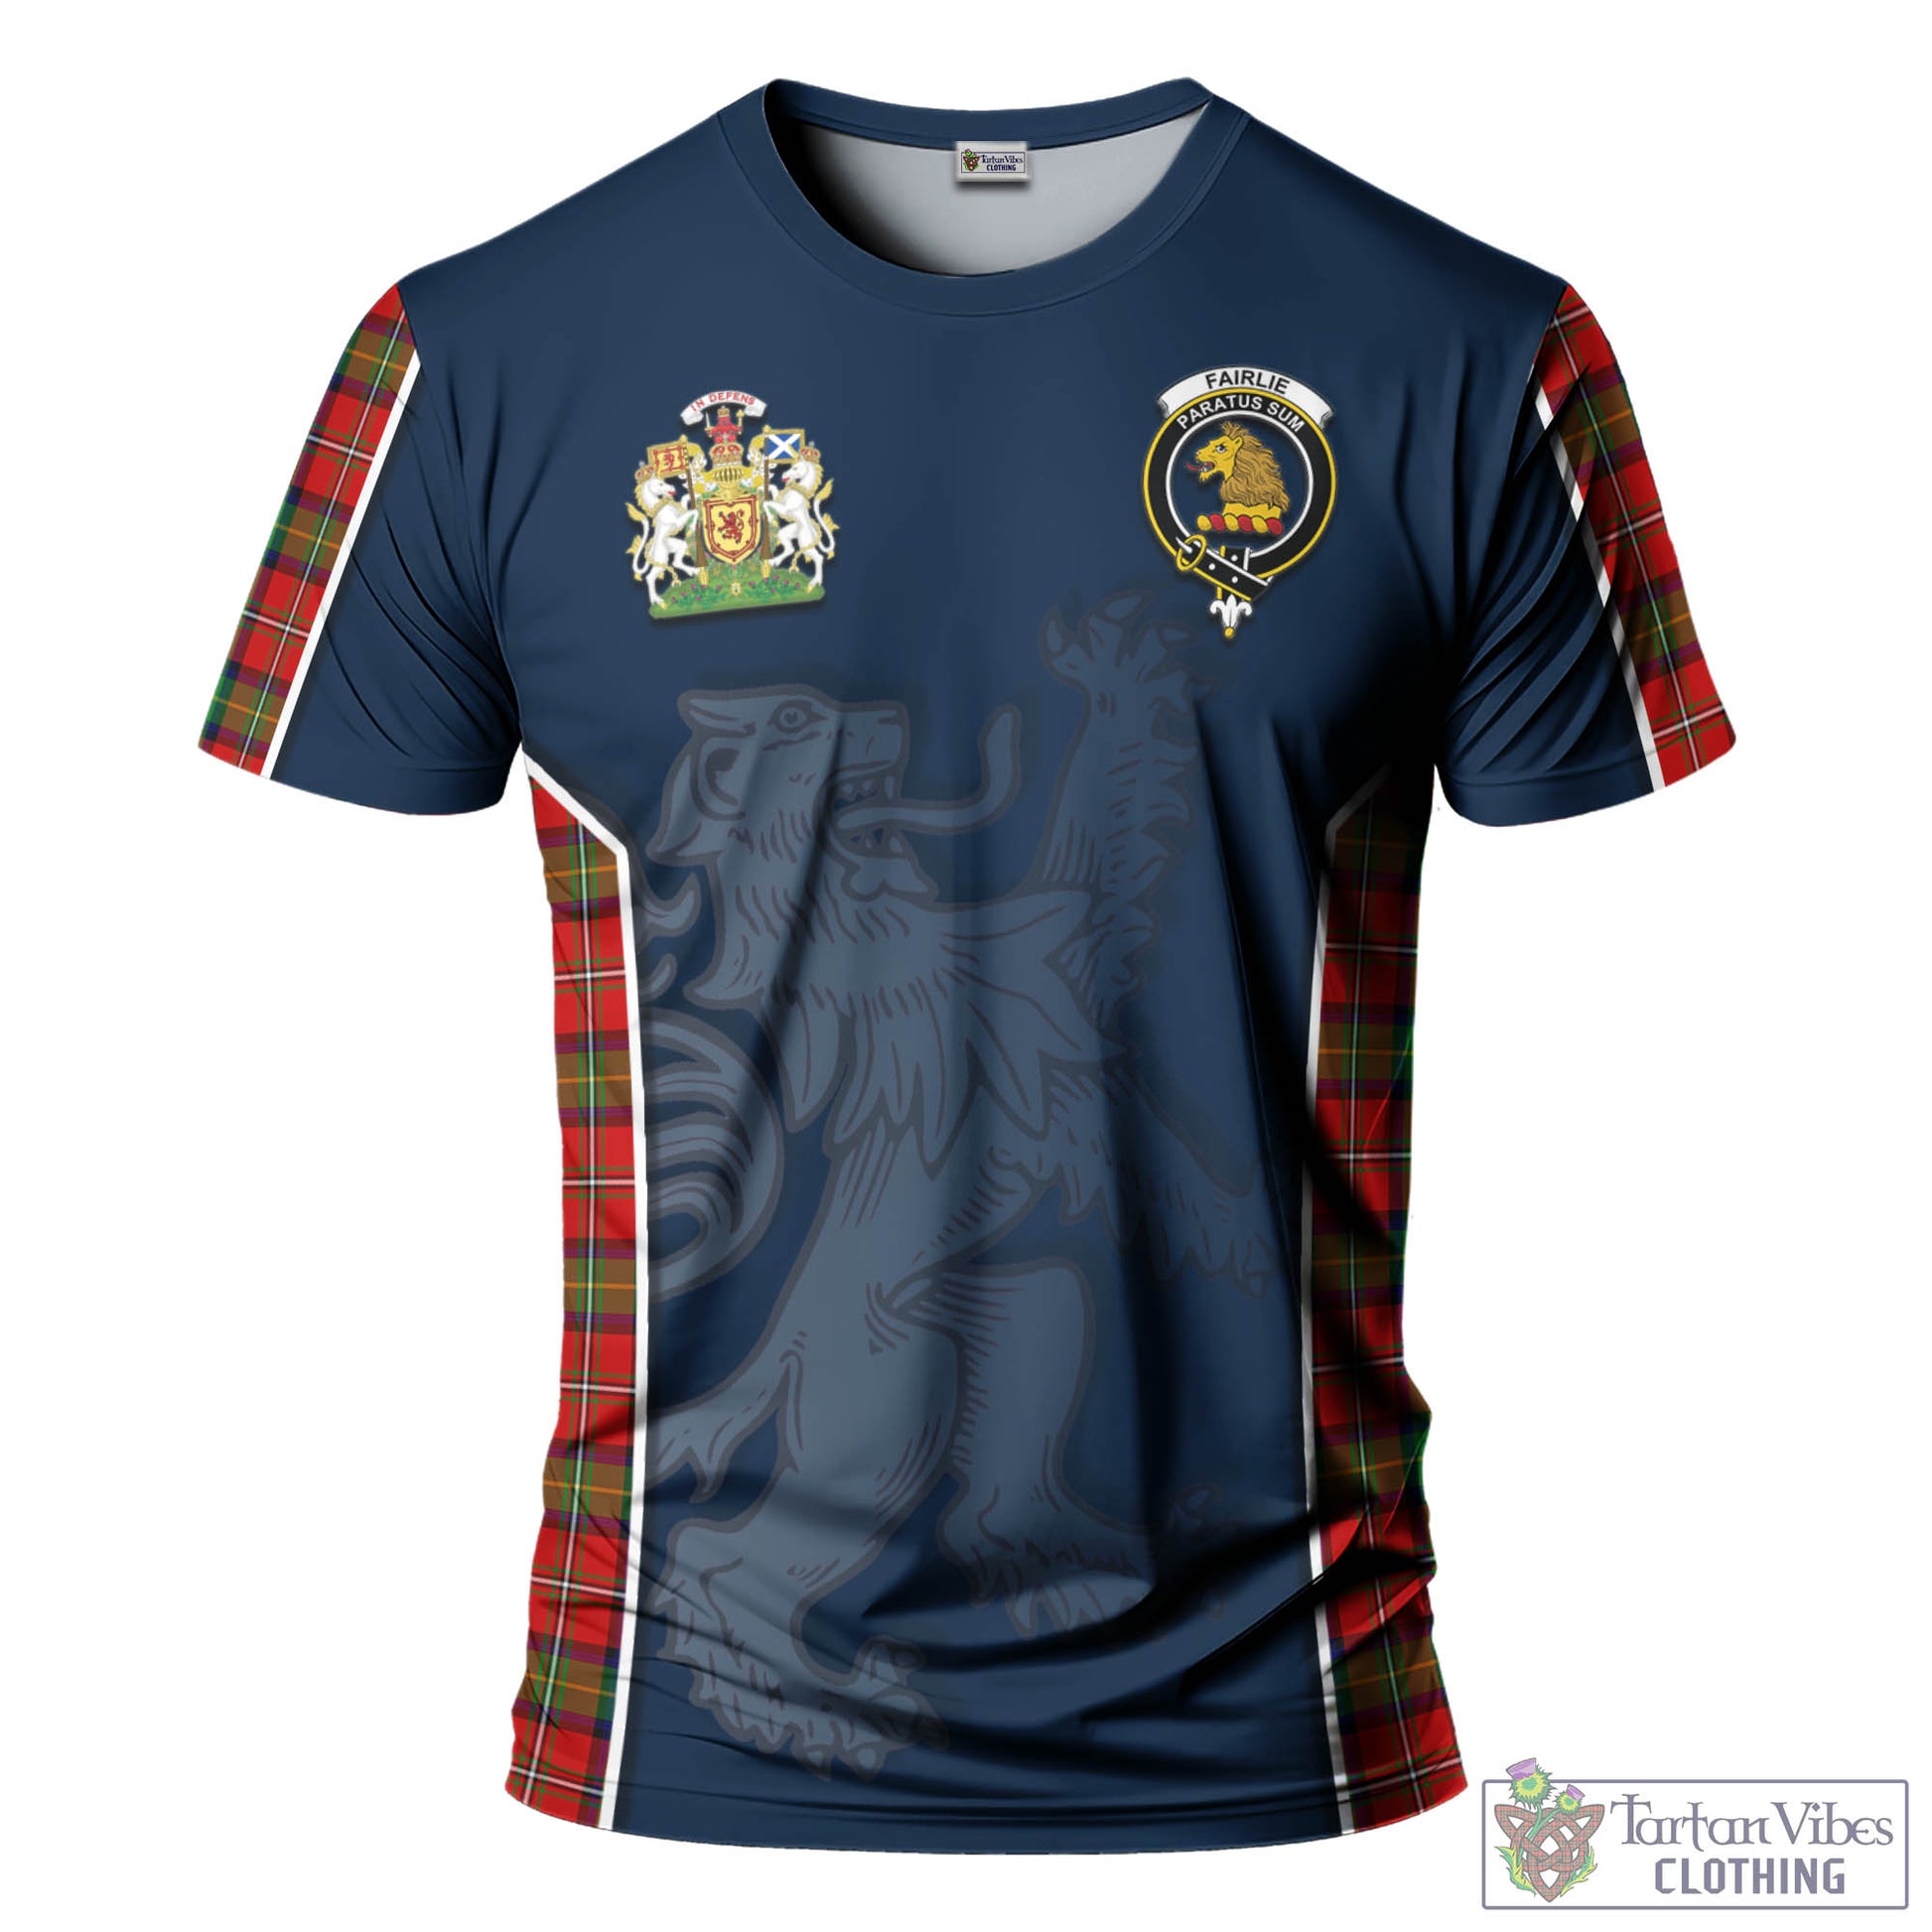 Tartan Vibes Clothing Fairlie Modern Tartan T-Shirt with Family Crest and Lion Rampant Vibes Sport Style